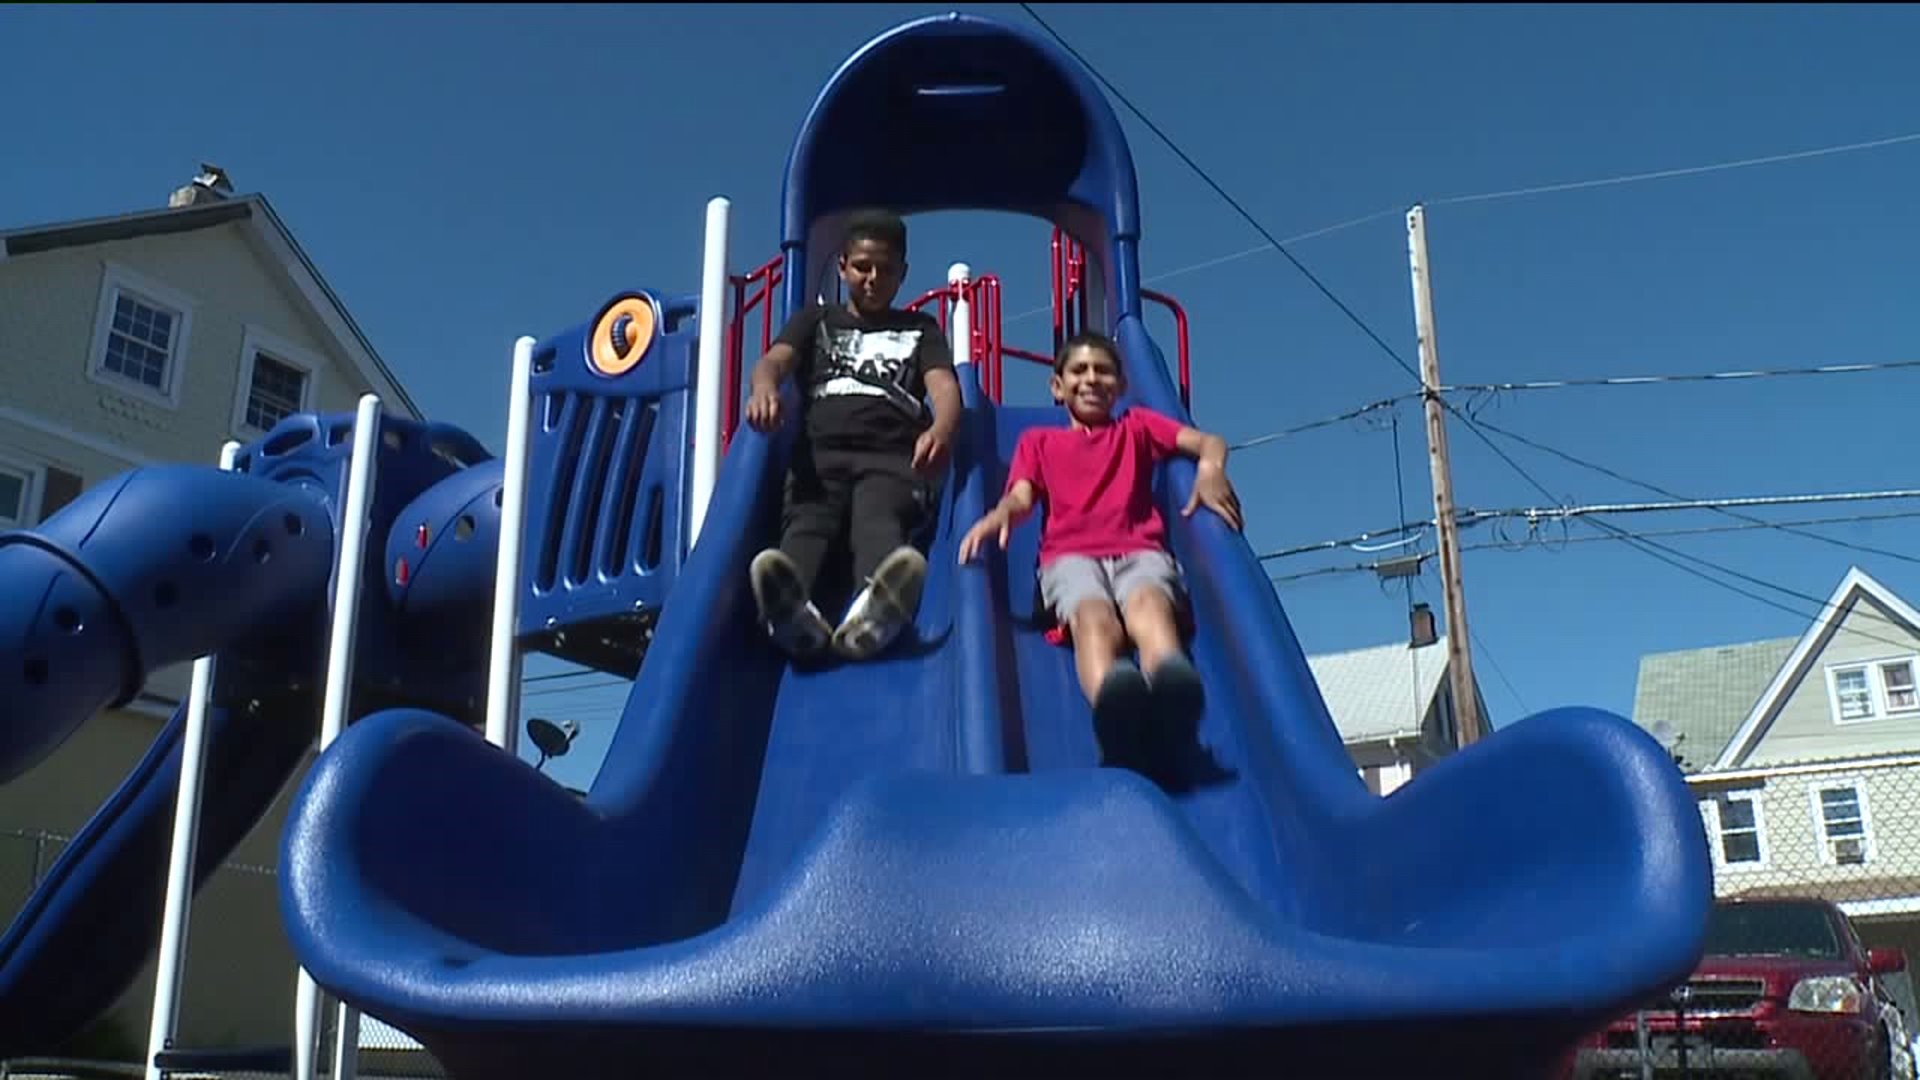 Hazleton Integration Project's Playground Funded by Joe Maddon Marks One Year Anniversary